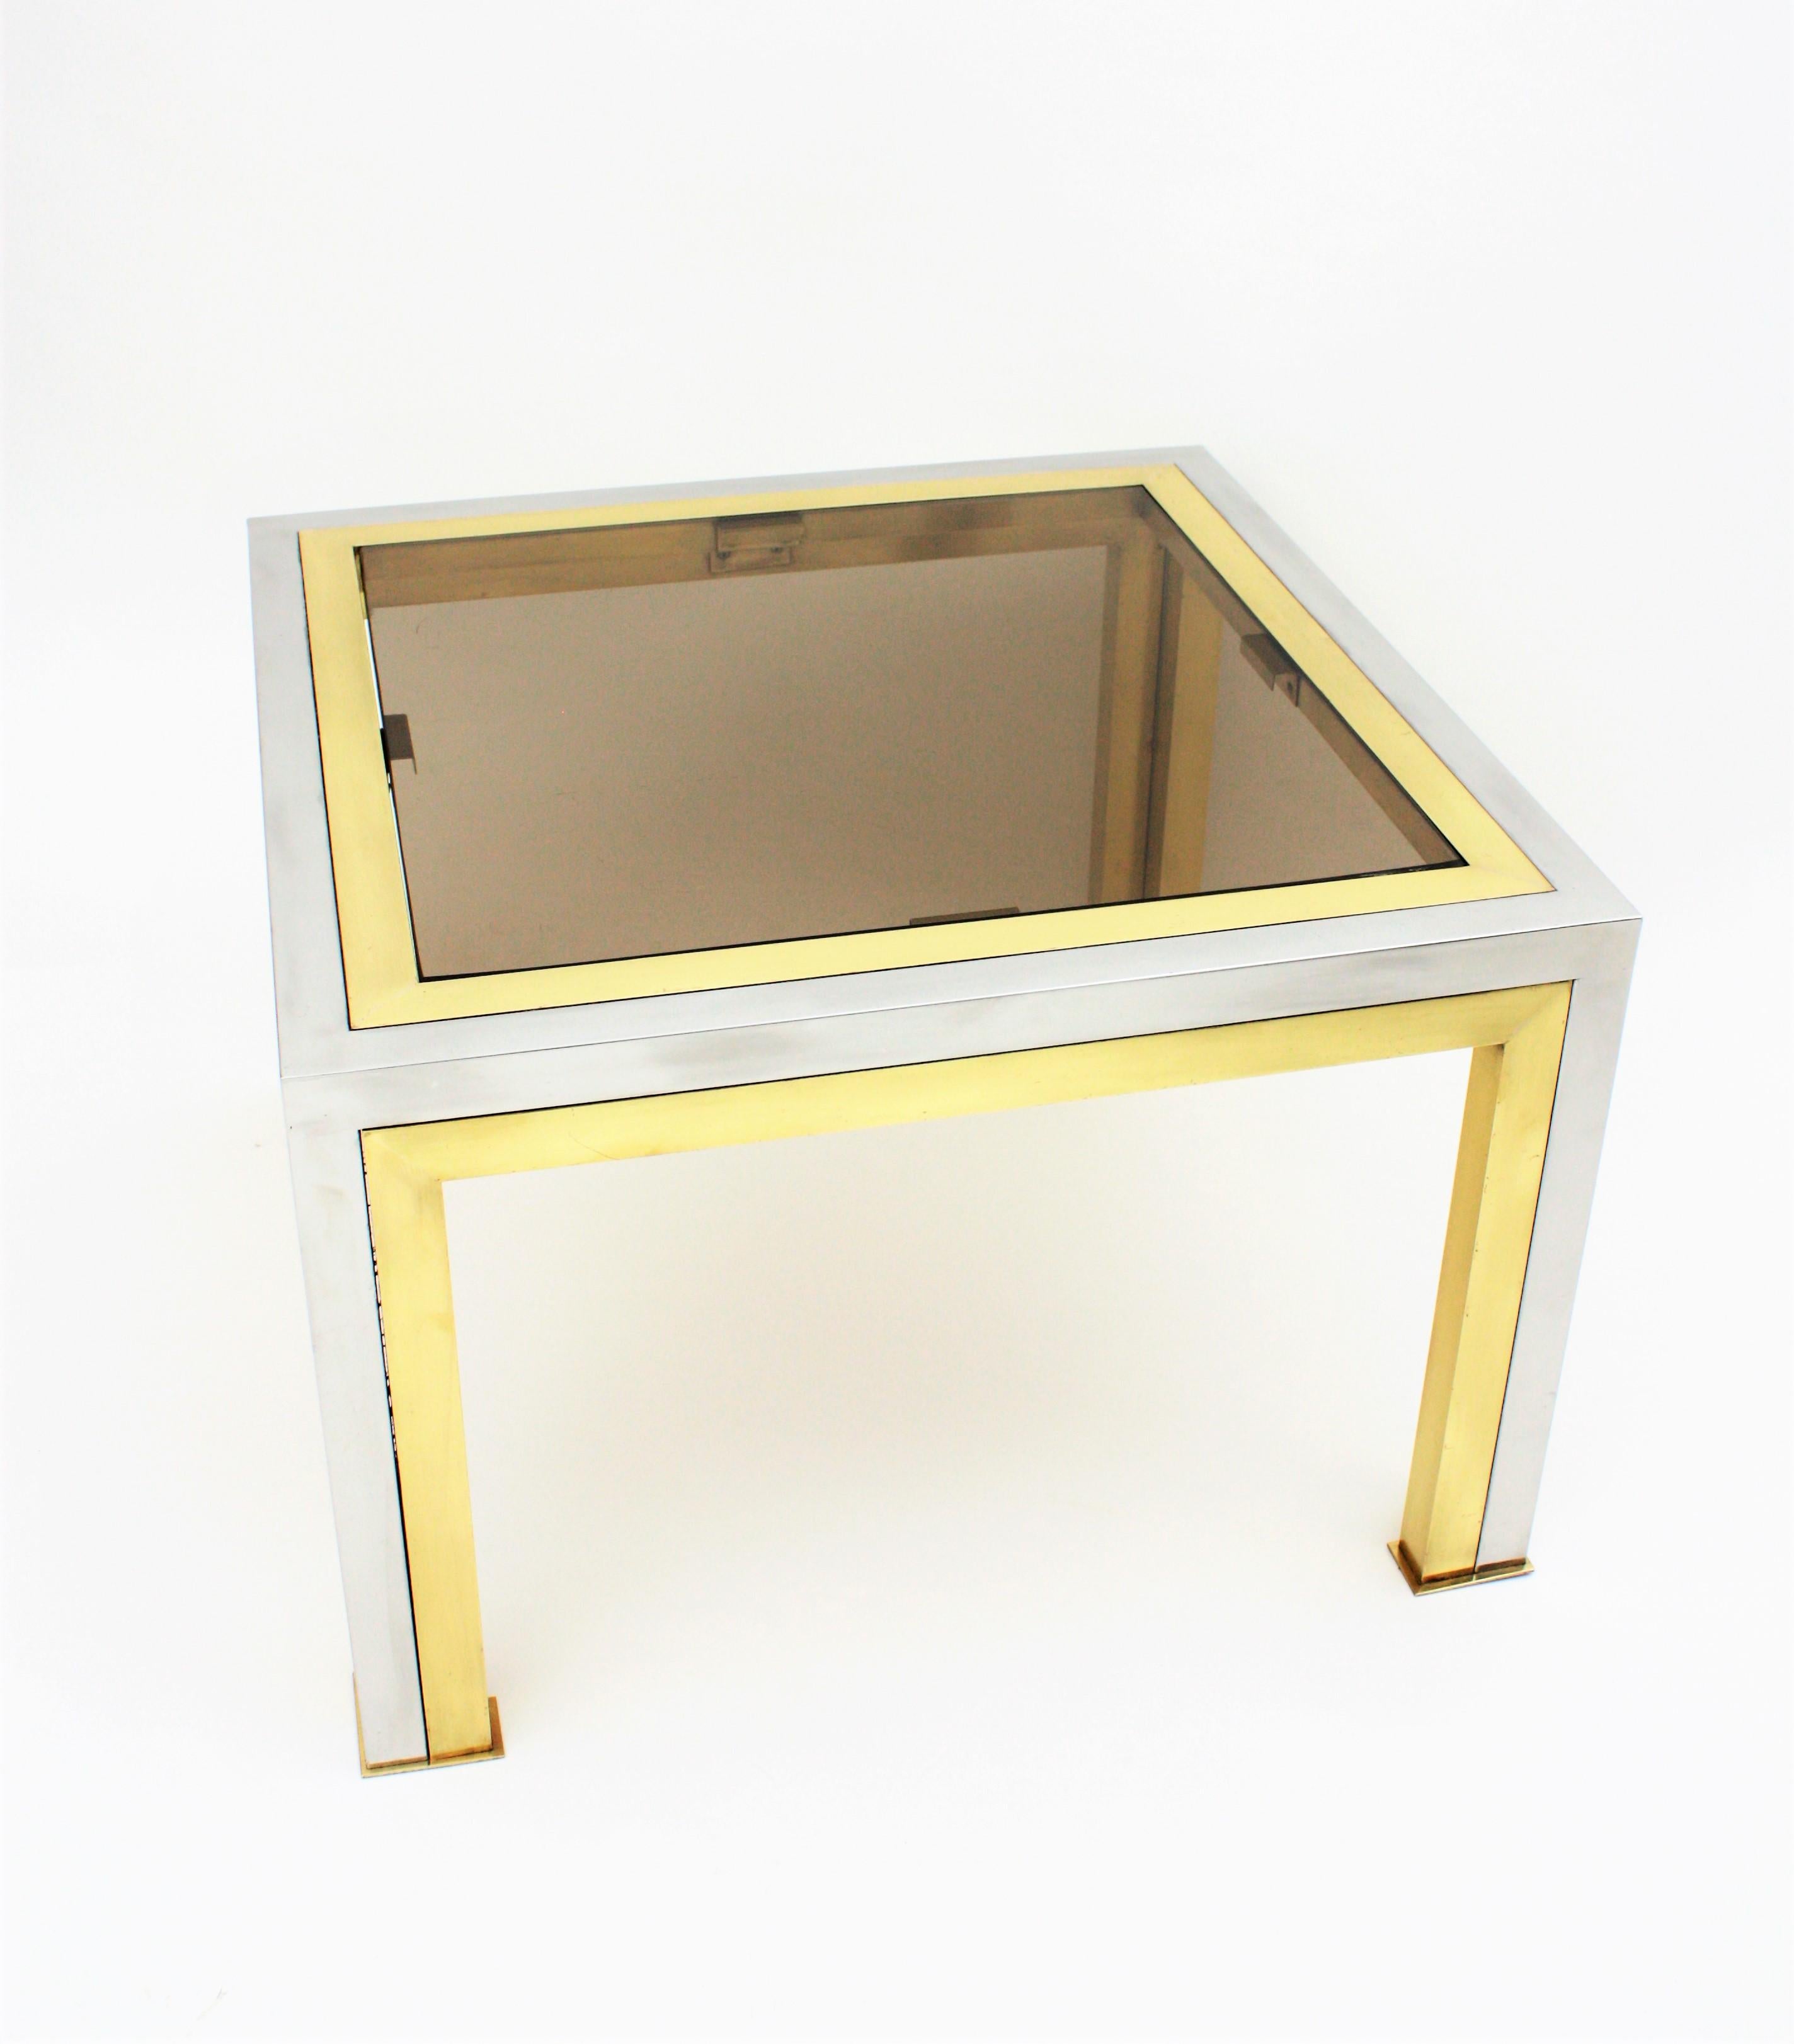 Romeo Rega Coffee Table in Brass, Chromed Steel and Glass 3